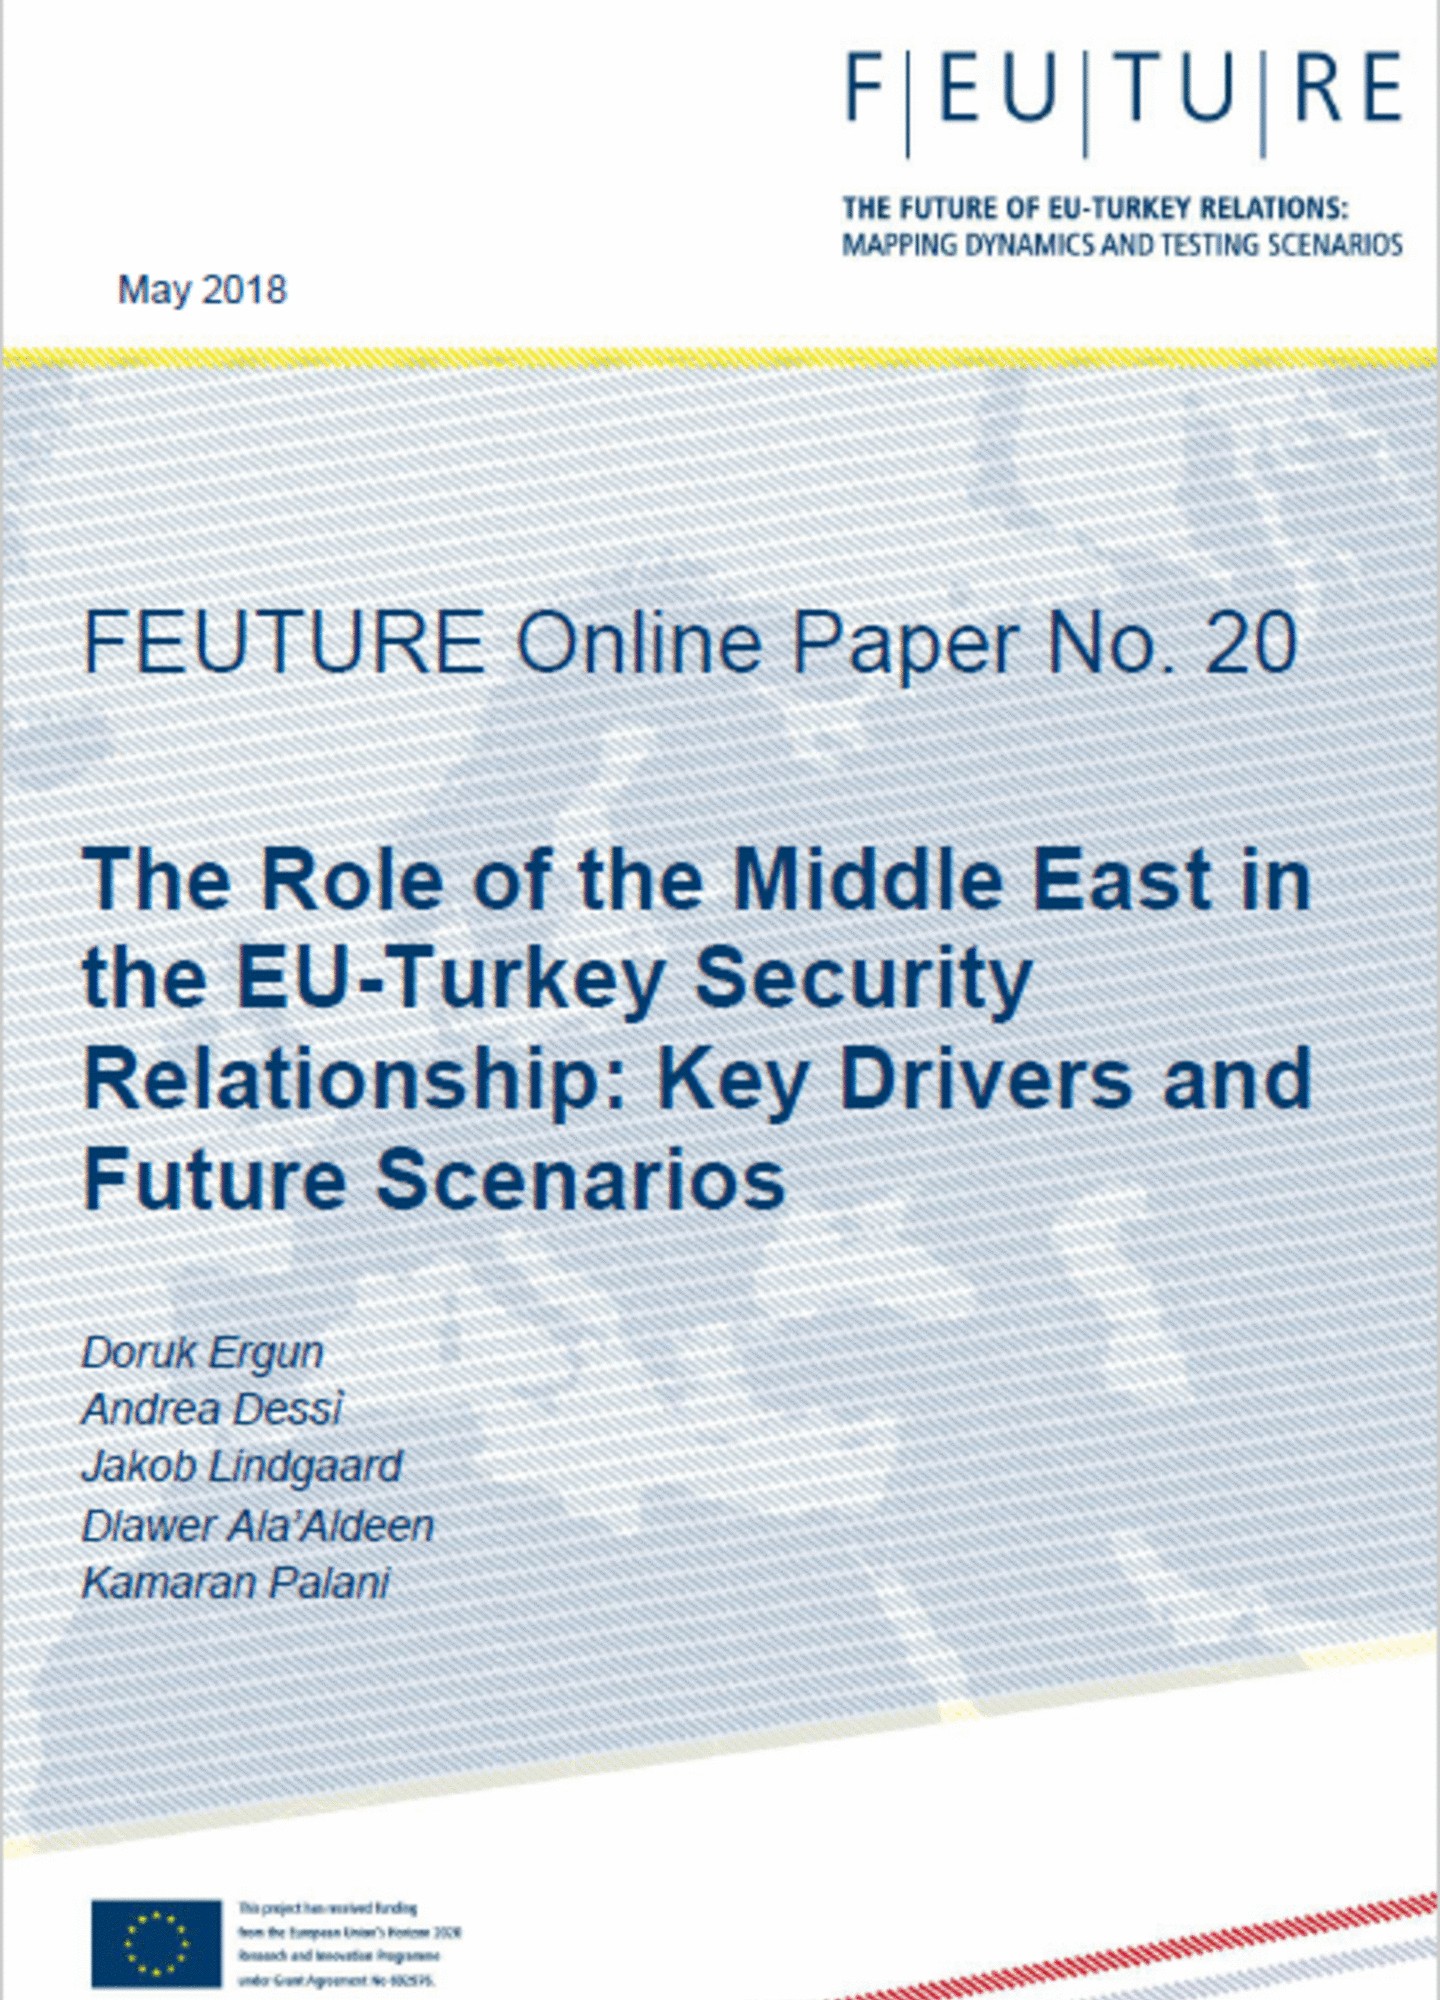 The Role of the Middle East in the EU-Turkey Security Relationship: Key Drivers and Future Scenarios